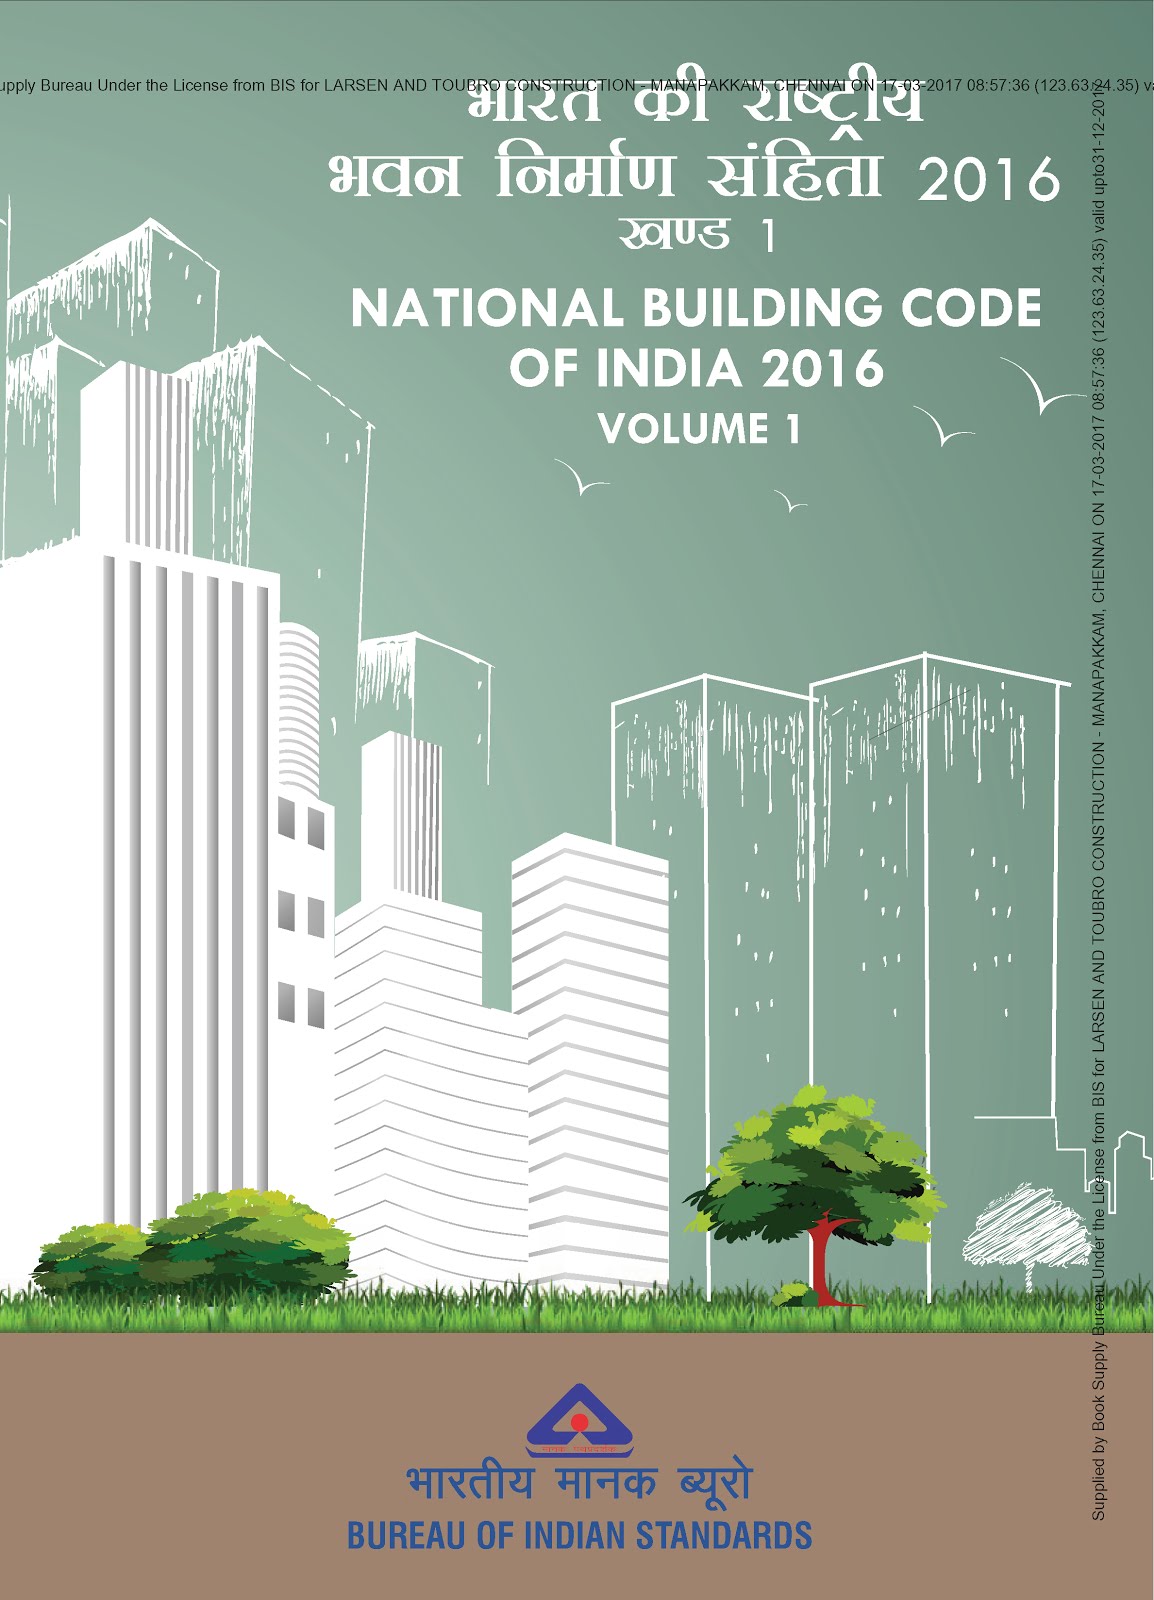 National Building Code of India 2016, Volume - 1